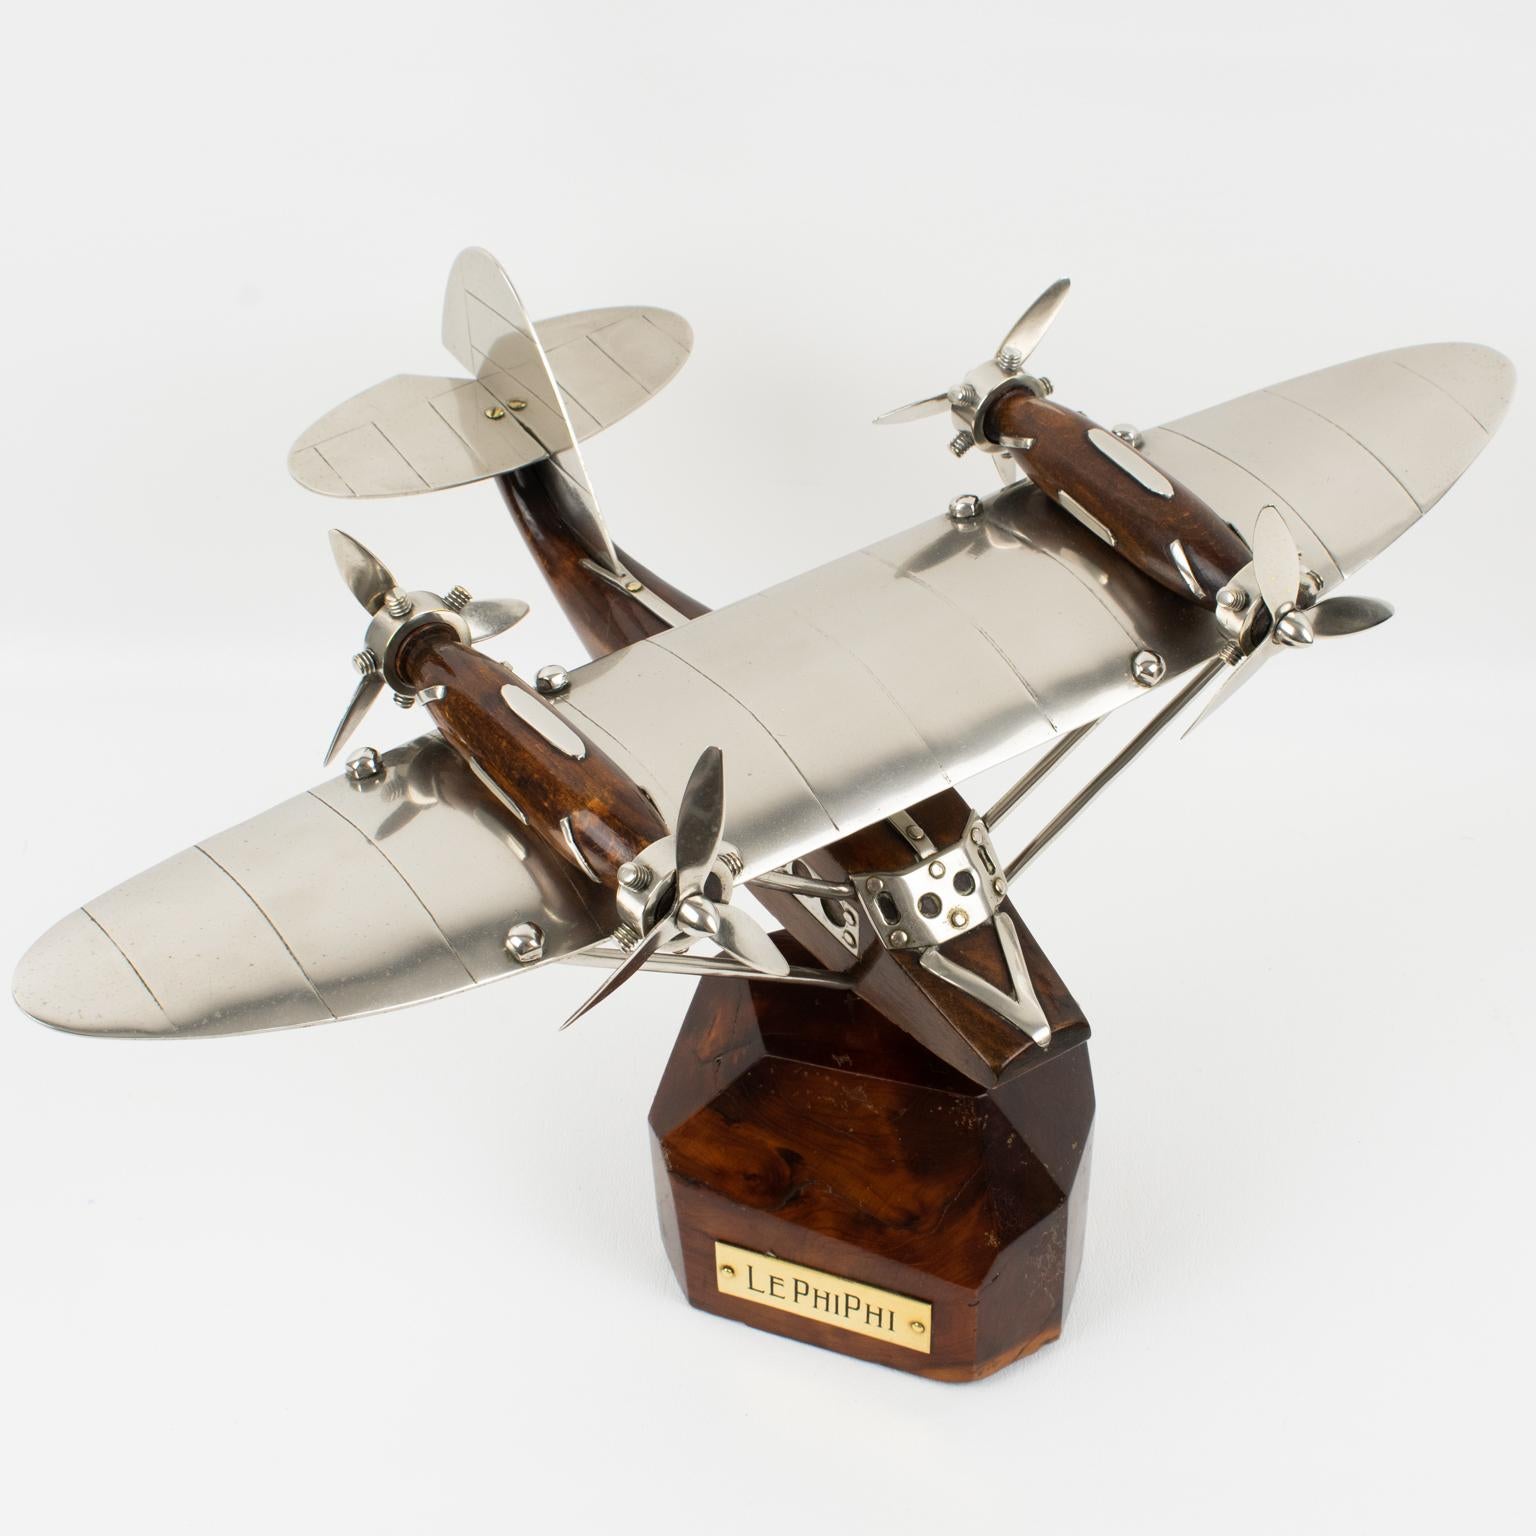 Art Deco Wood and Chrome Airplane SeaPlane Aviation Model, France 1940s For Sale 4